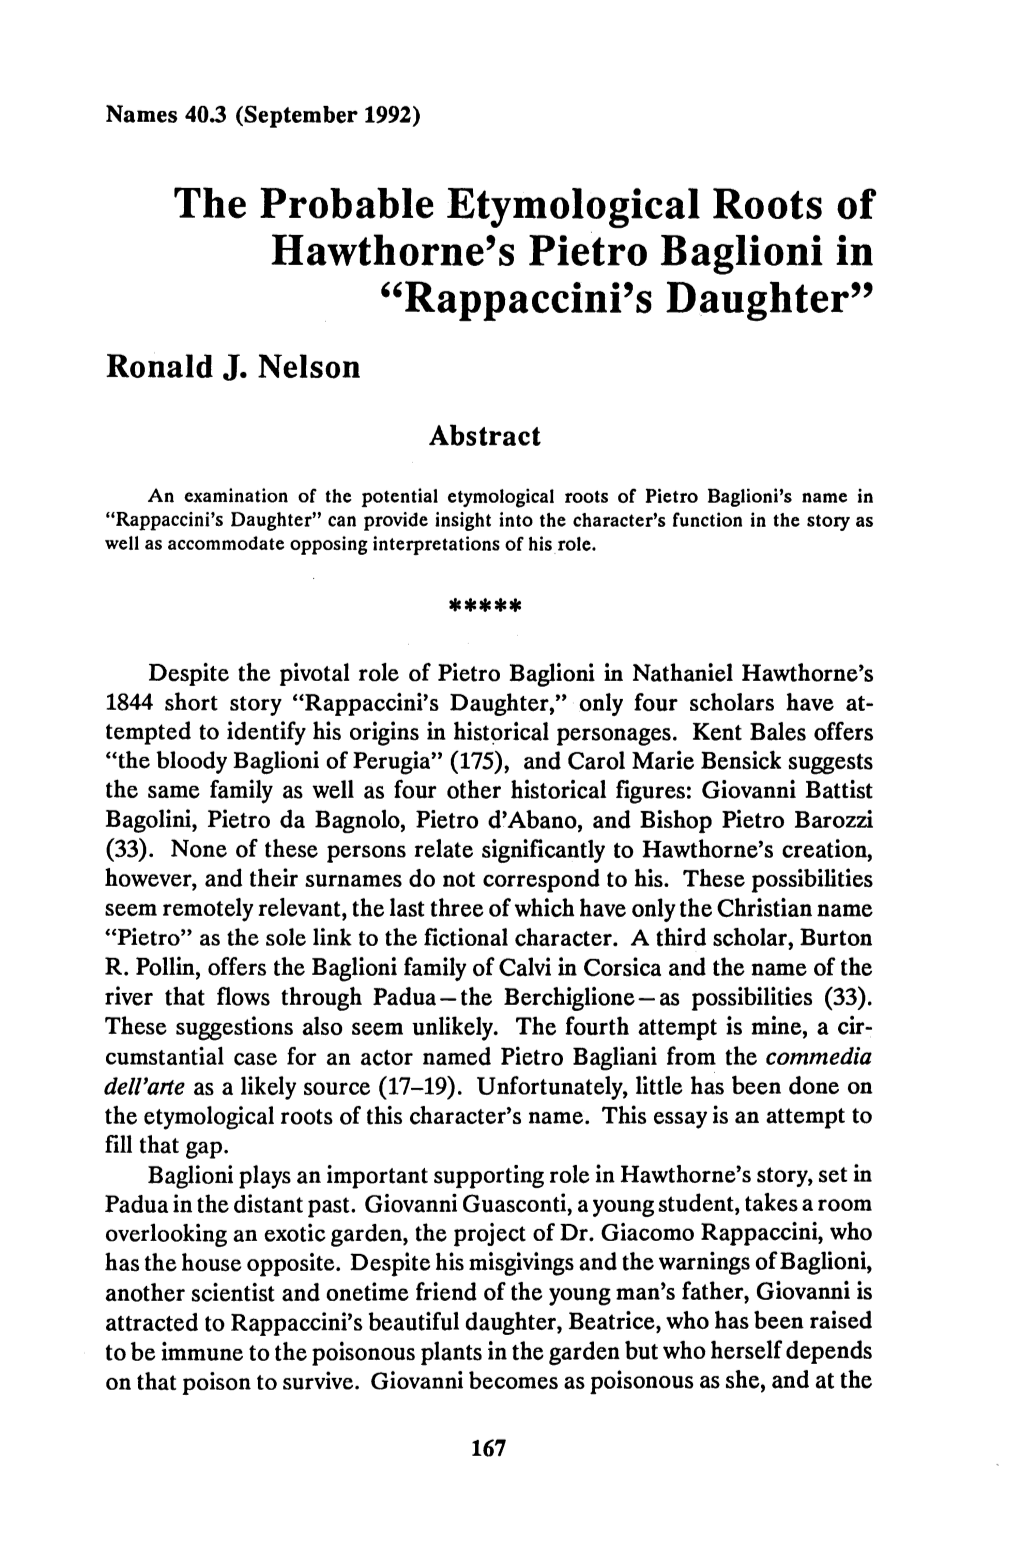 The Probable Etymological Roots of Hawthorne's Pietro Baglioni in Â•Œrappaccini's Daughterâ•Š